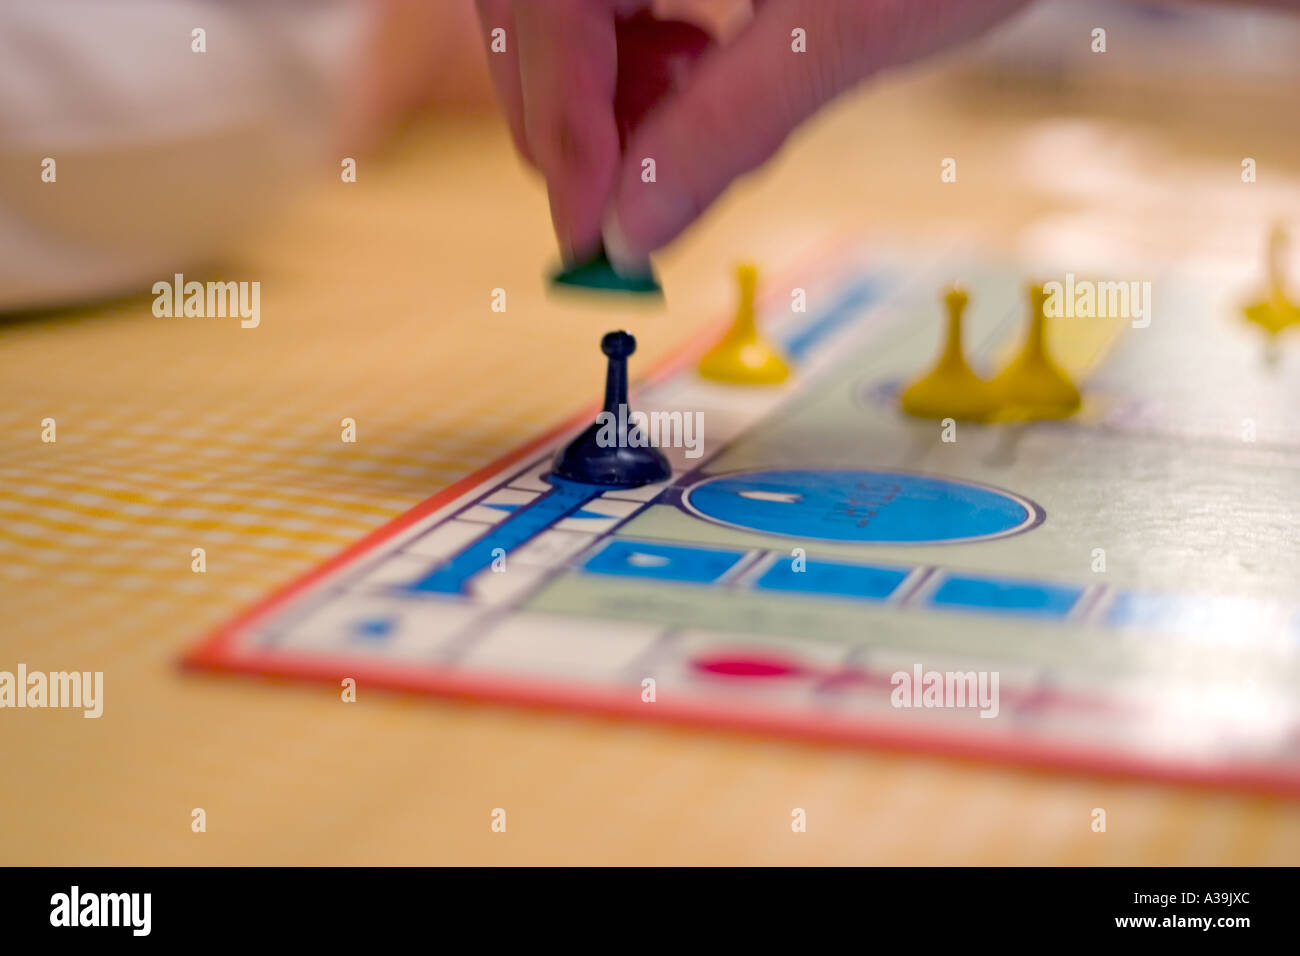 Capturing another players piece playing board game Sorry Stock Photo